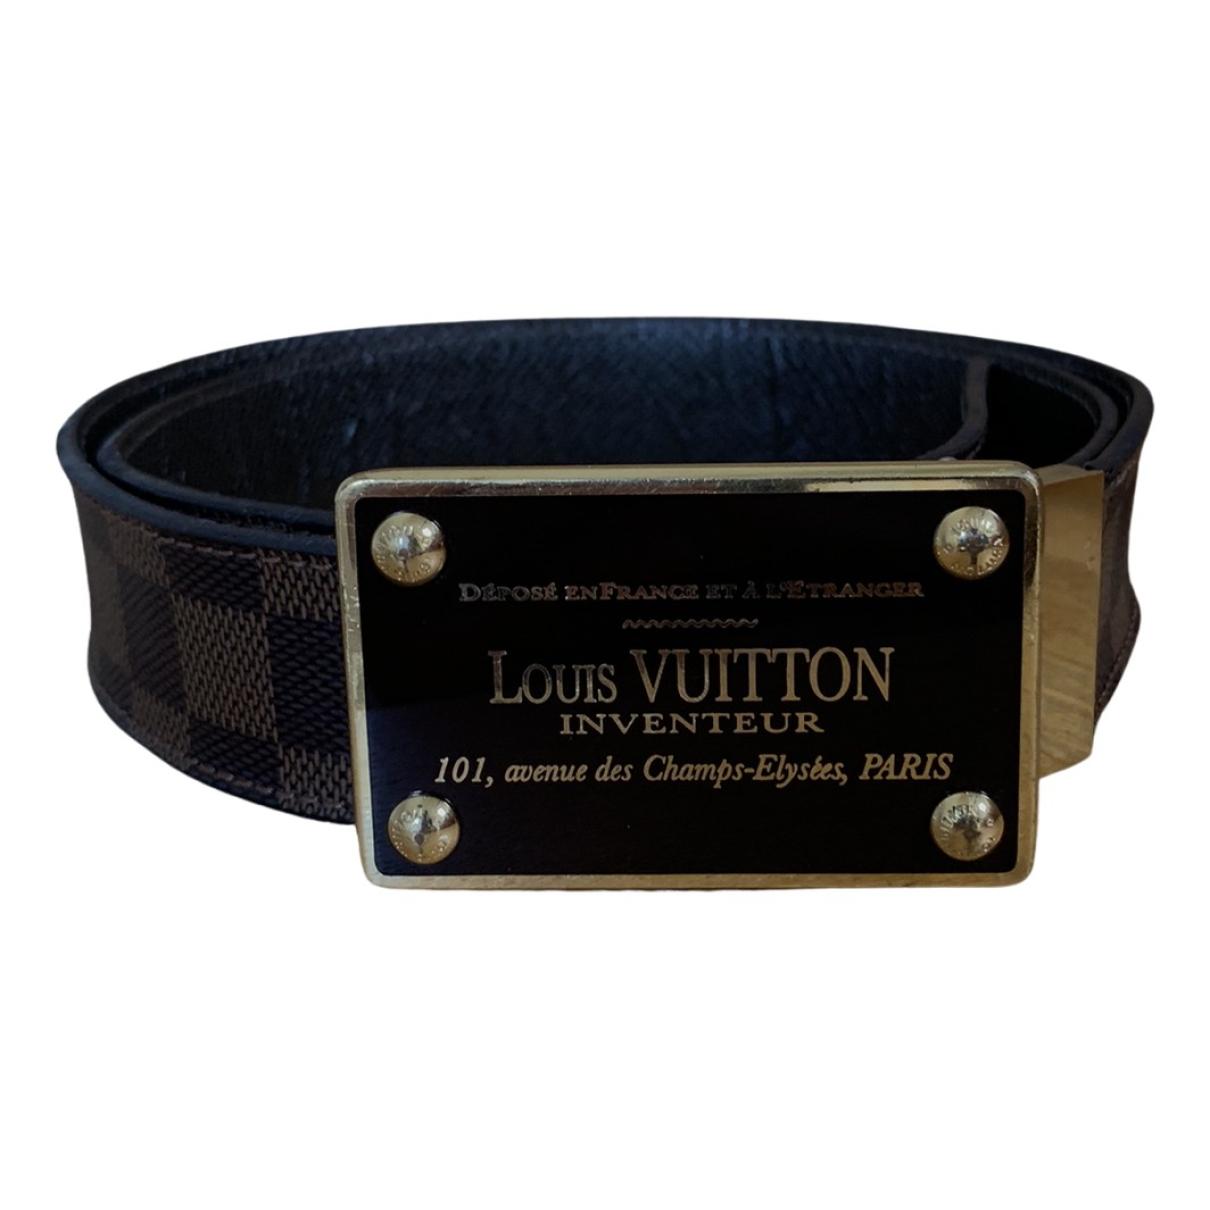 Initiales leather belt Louis Vuitton Khaki size L international in Leather  - 19437482